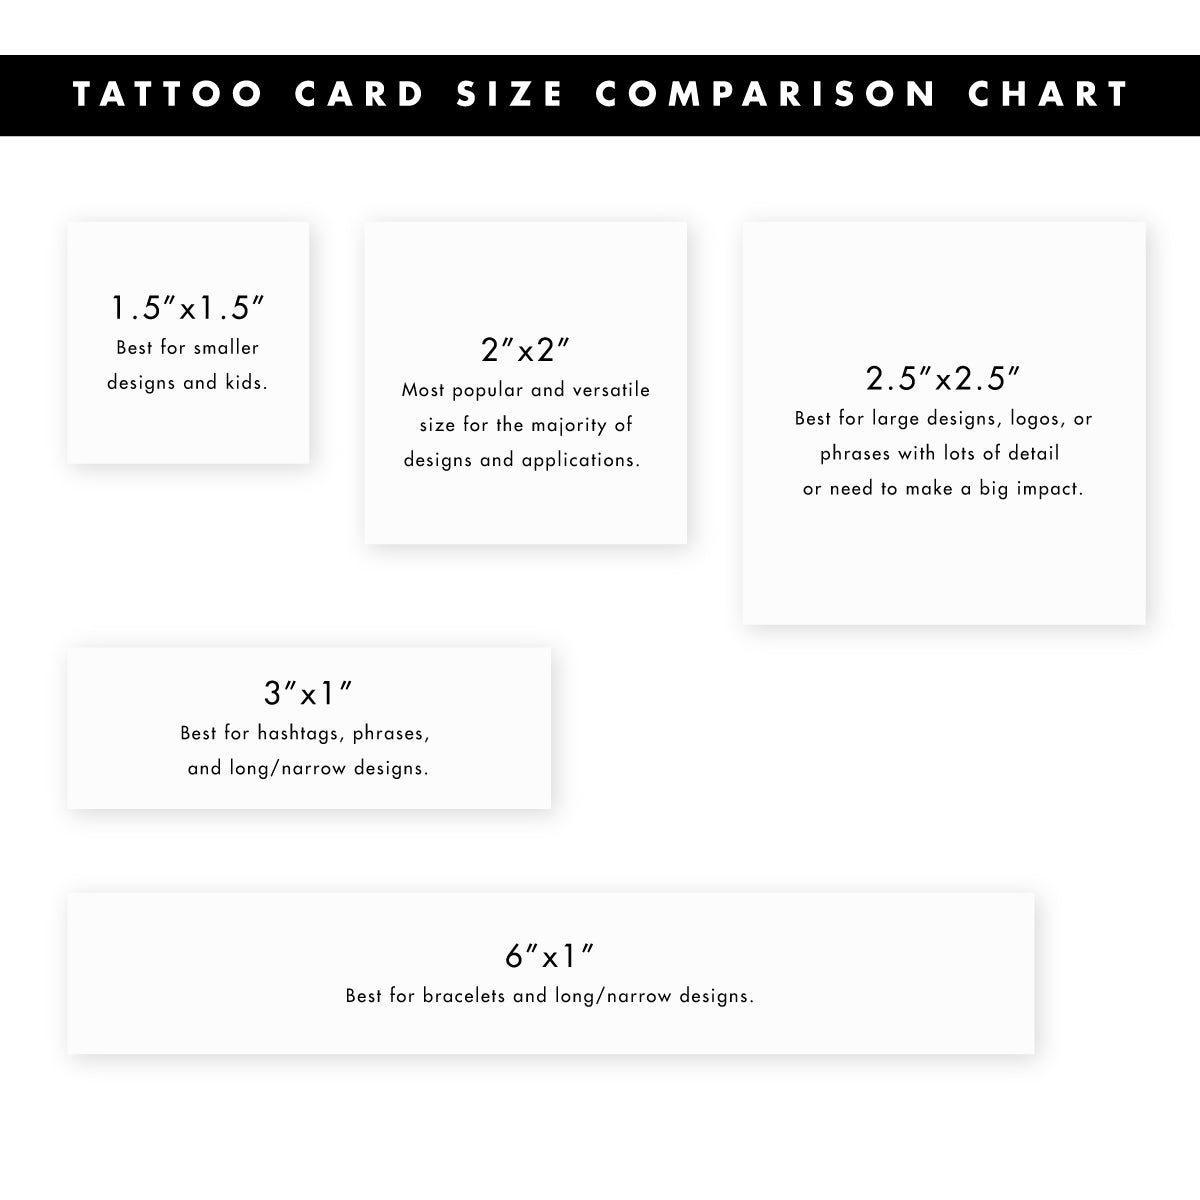 THE JHAIHO TATTOO SIZING GUIDE Tattoo Sizes Knowing What you Want  by  Jhaiho  Medium